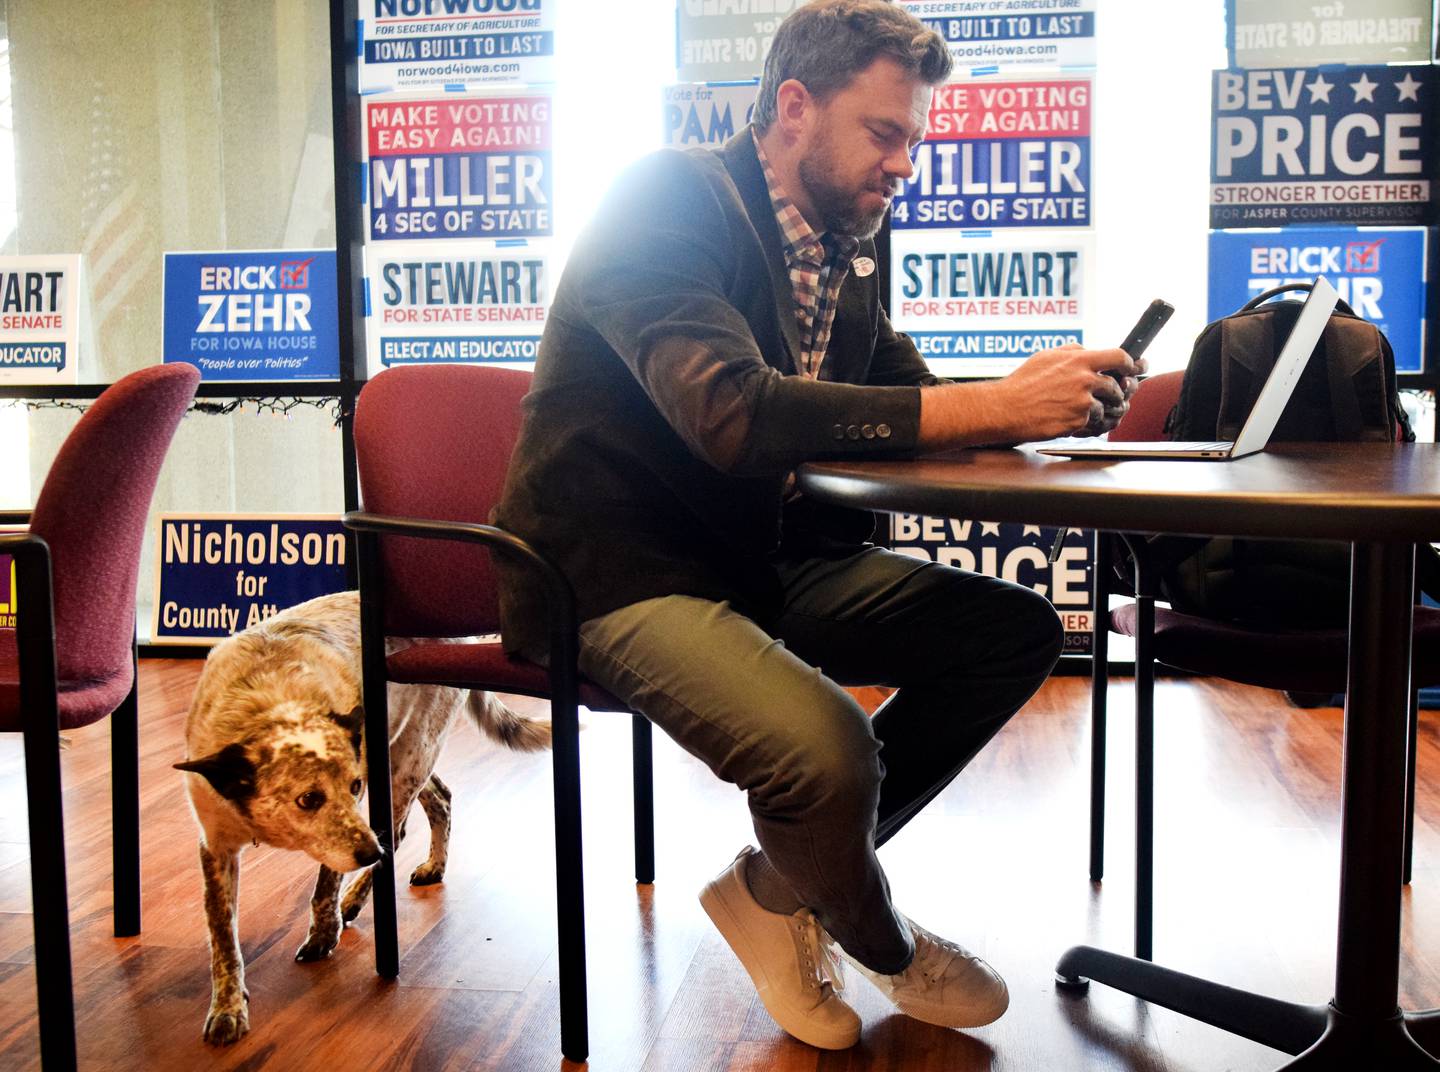 Erick Zehr, the Democratic candidate running for Iowa House District 38, is joined by his dog Kemba while tracking down absentee ballot voters at the Jasper County Democratic Party headquarters on Nov. 8 in Newton.